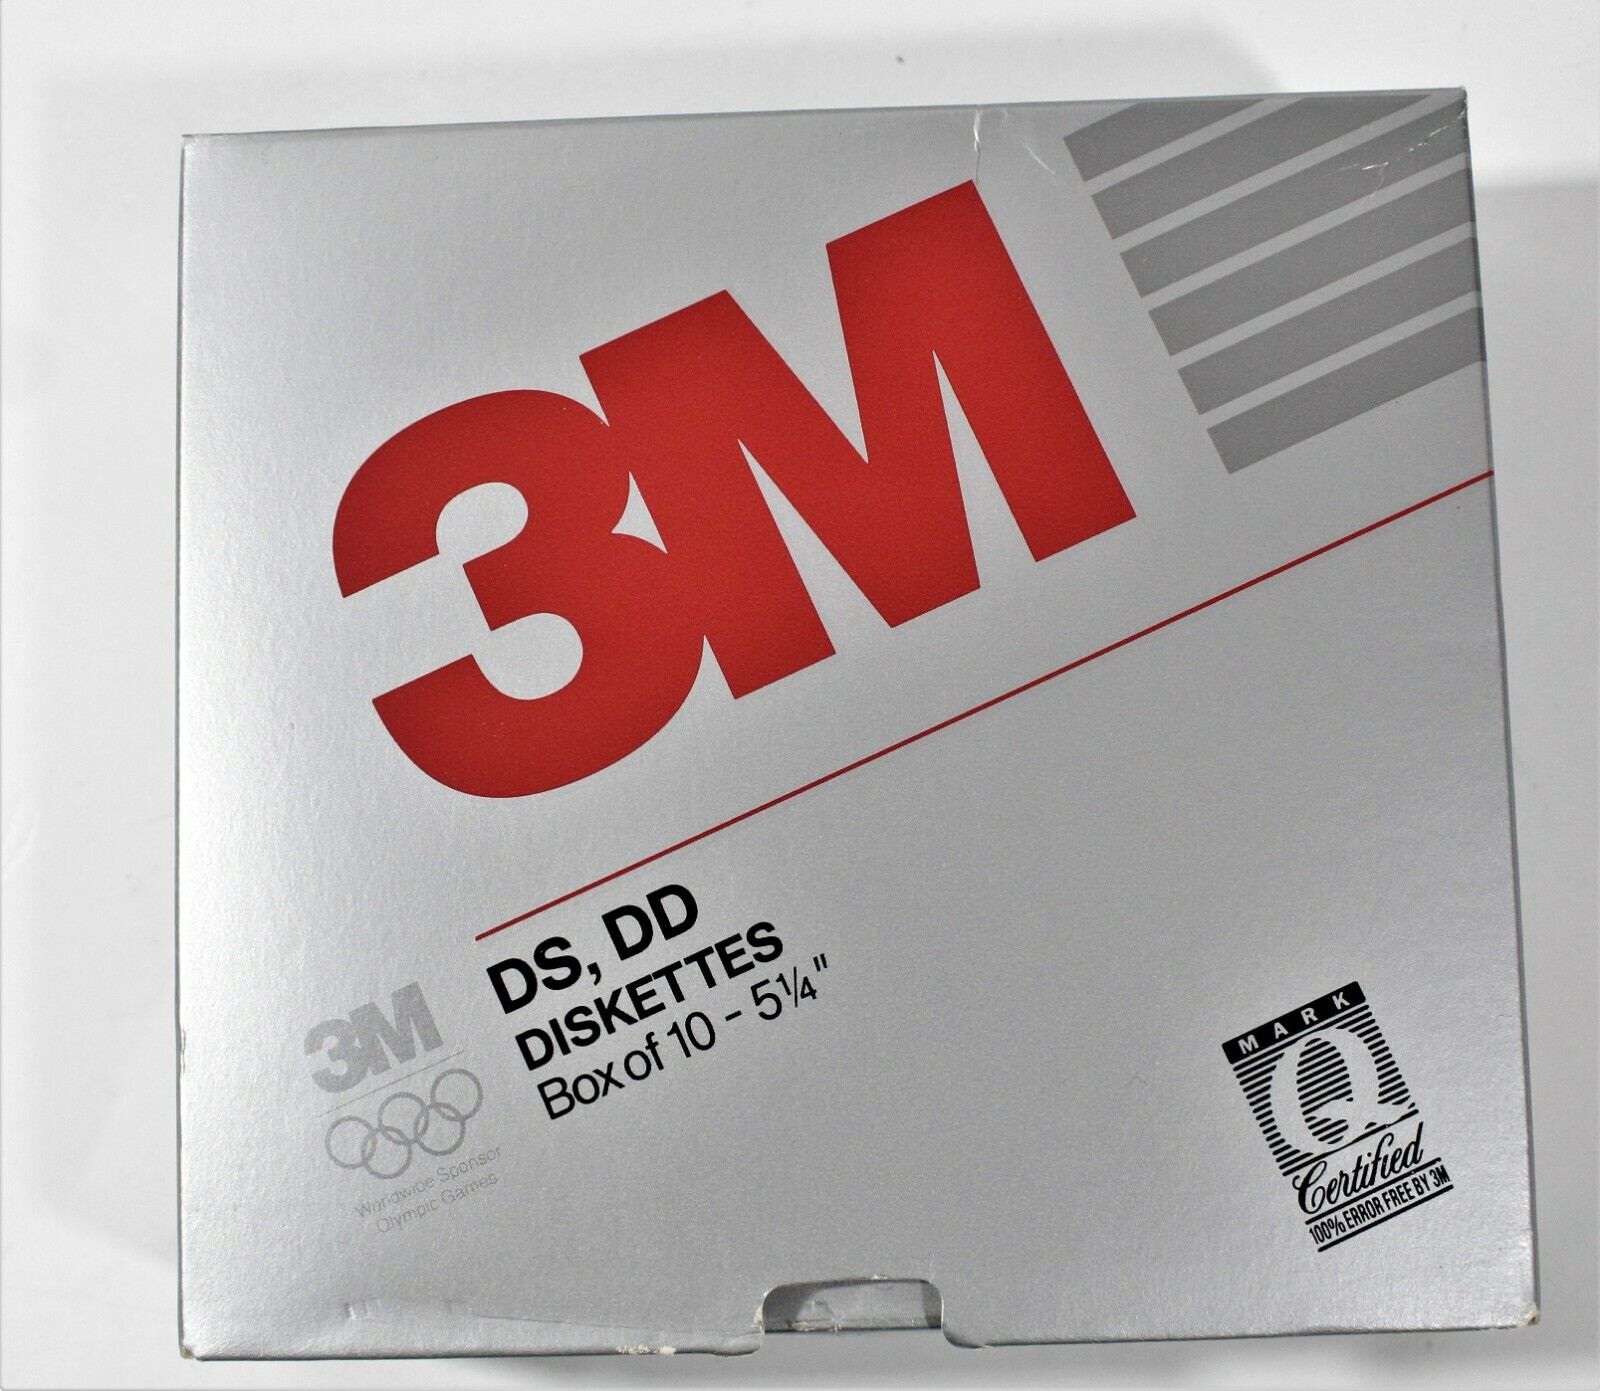 Vintage 3M DS,DD Diskettes Box of 10 5 1/4